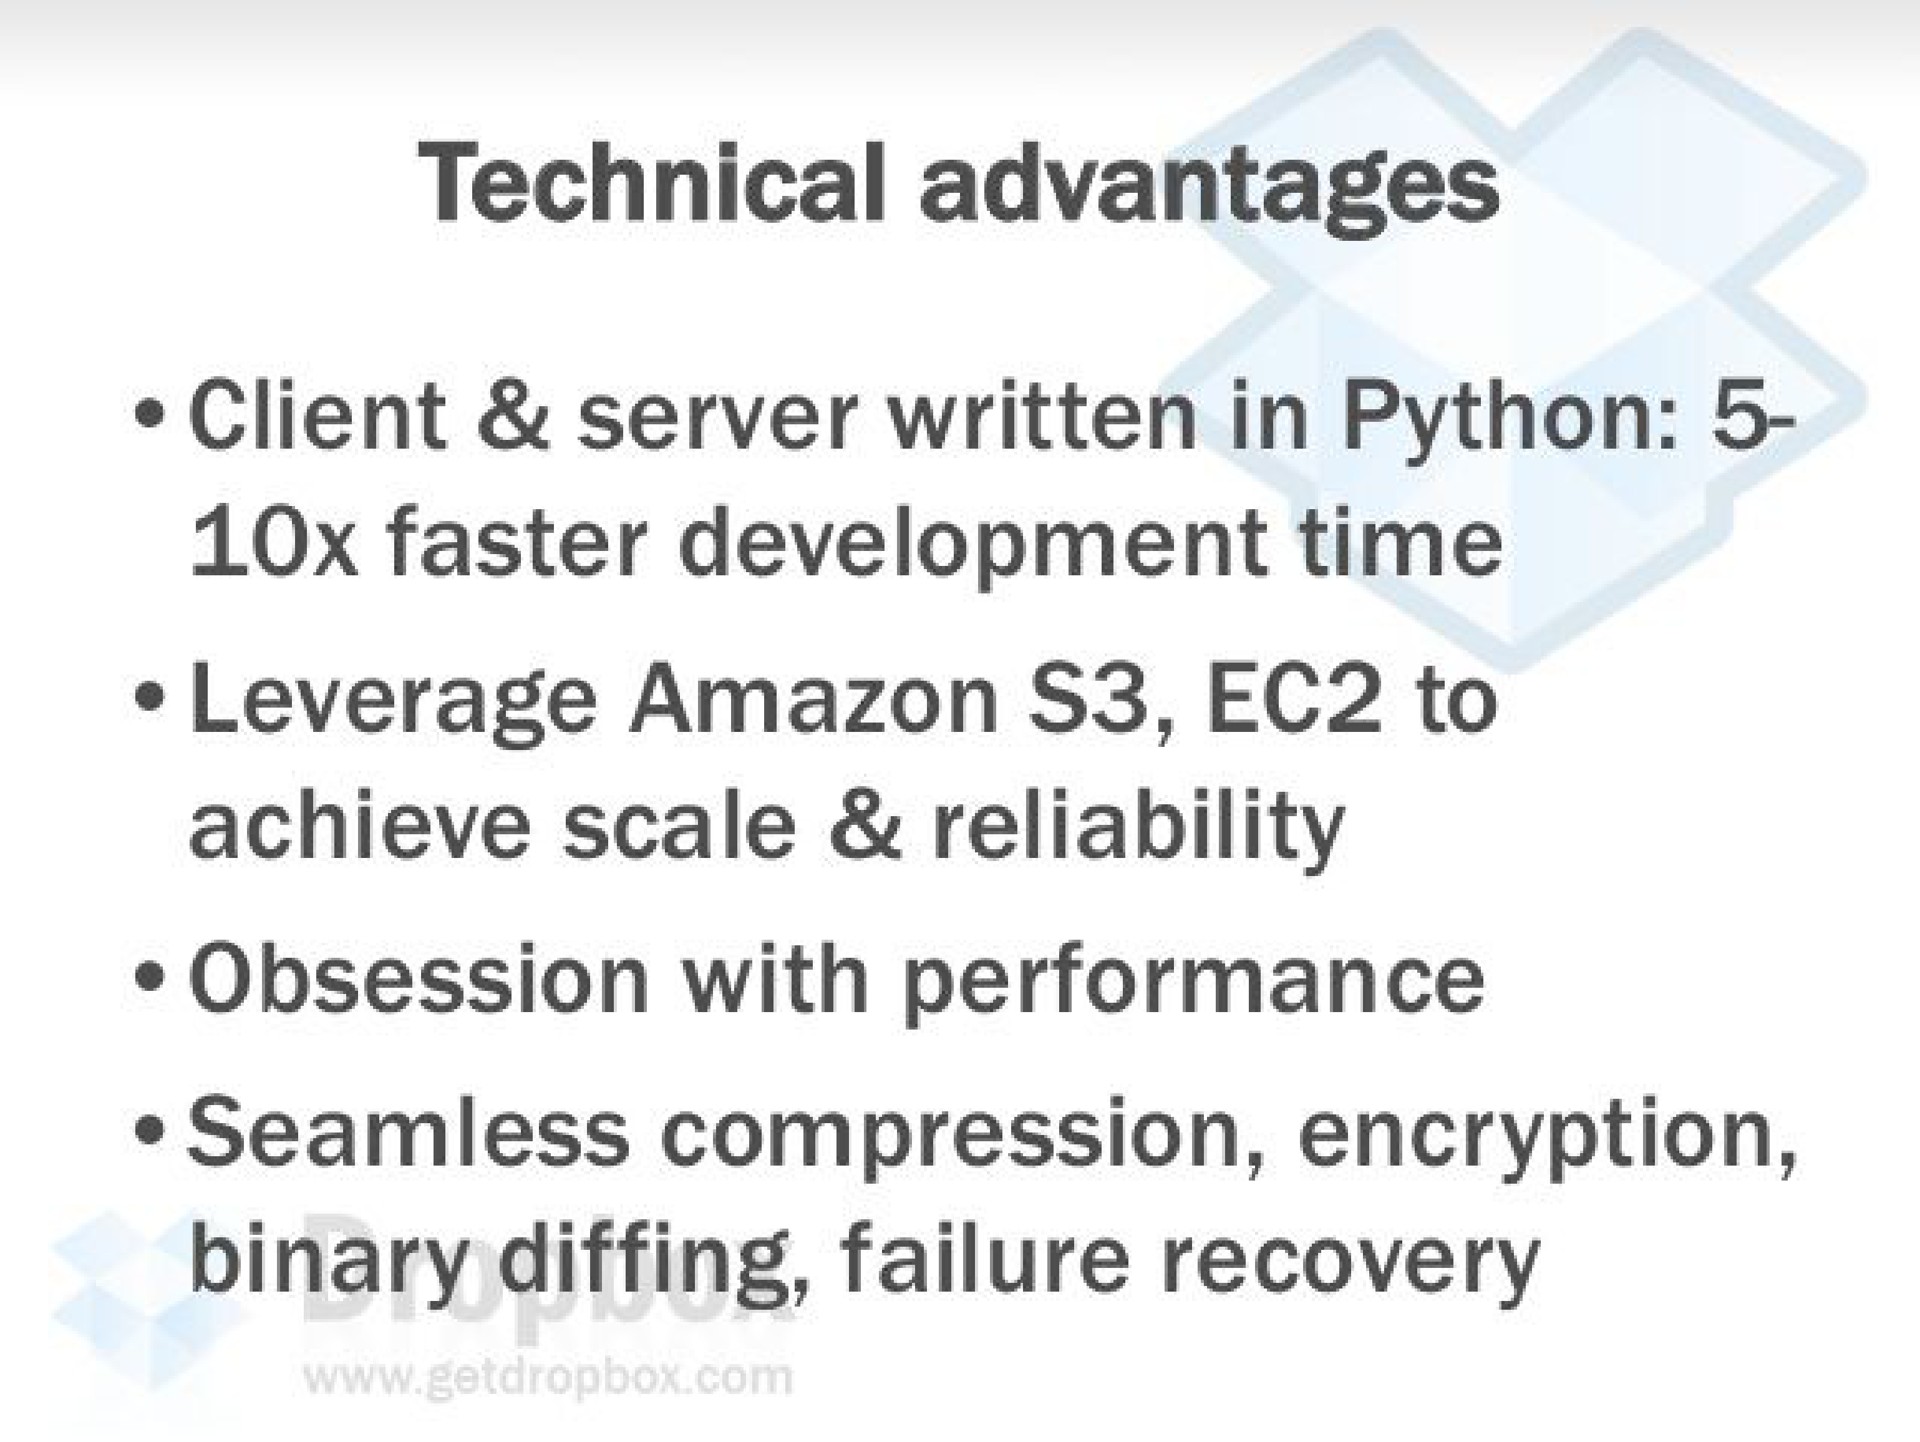 technical advantages client server written in python faster development time leverage to achieve scale reliability obsession with performance seamless compression encryption binary failure recovery | Dropbox